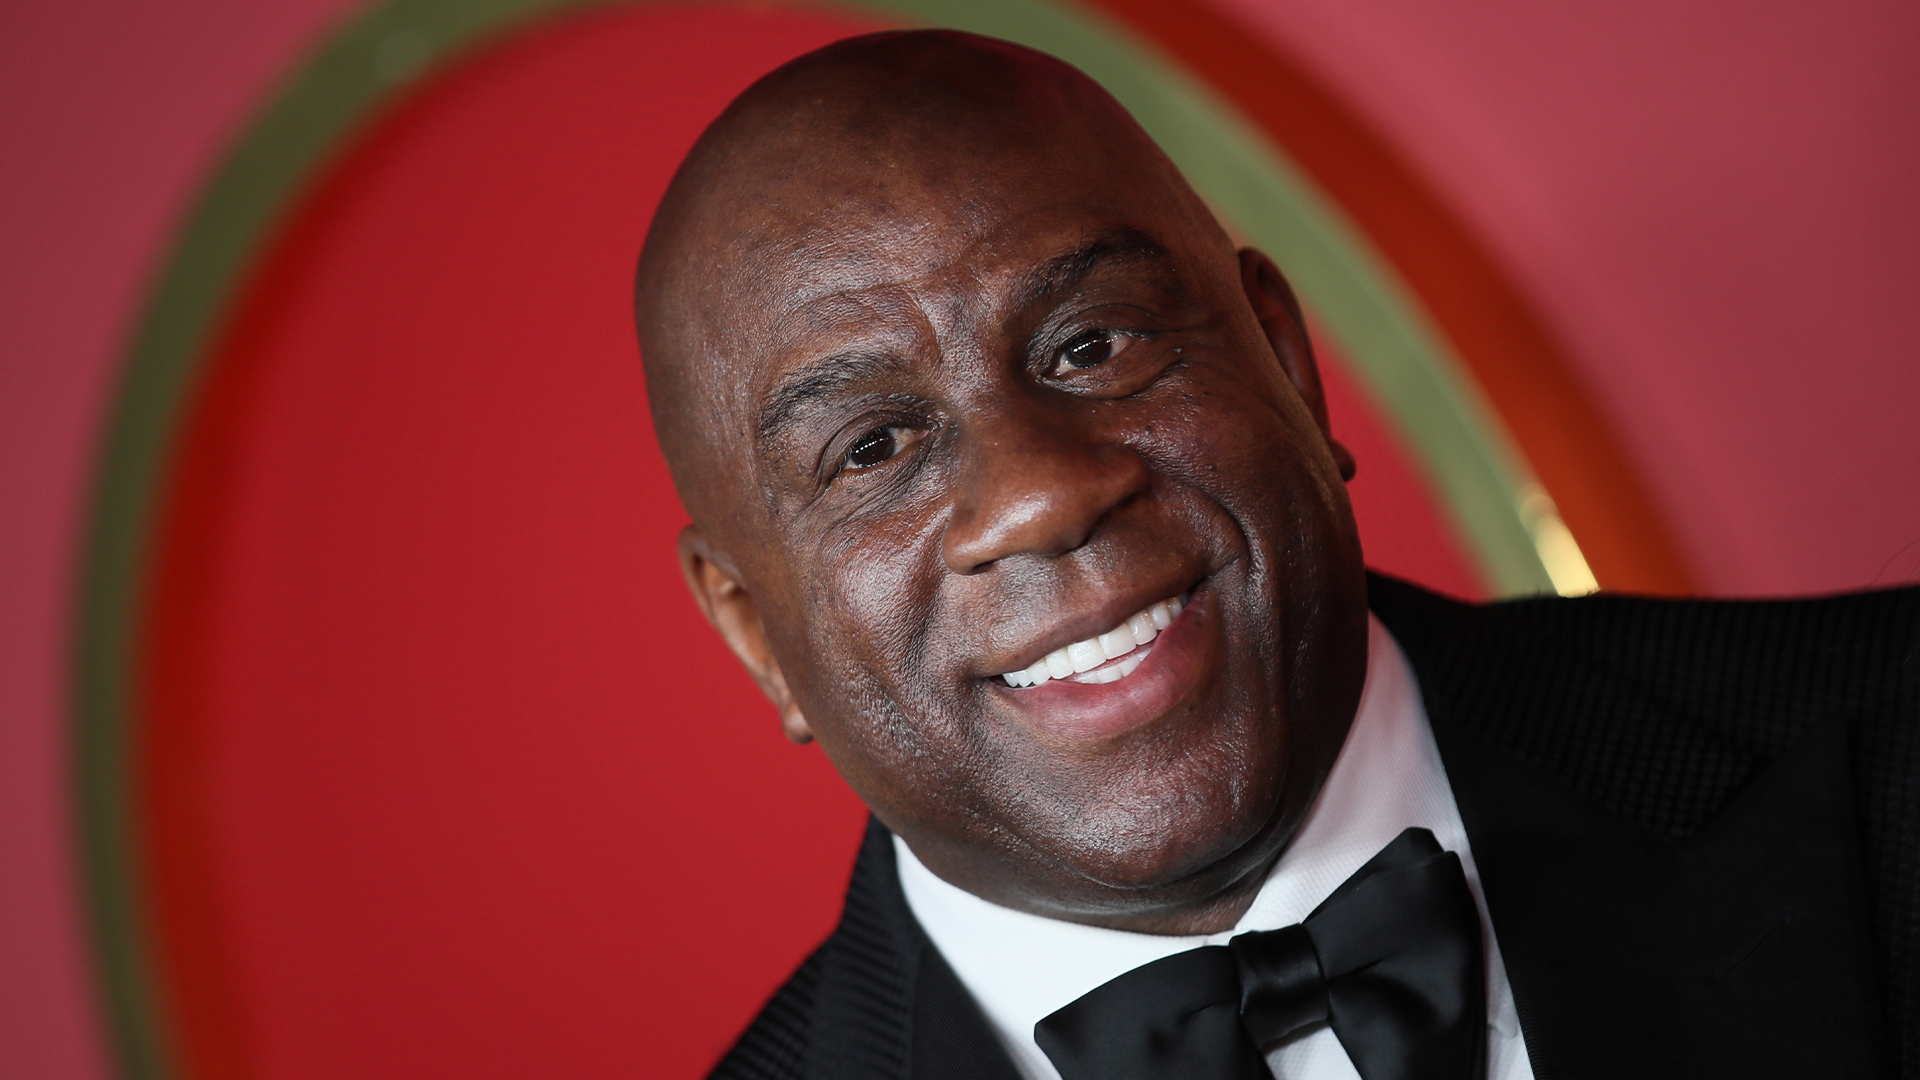 Magic Johnson Gives A Combined $6K To 2 Washington, D.C. Students Under The Condition That They Open Bank Accounts